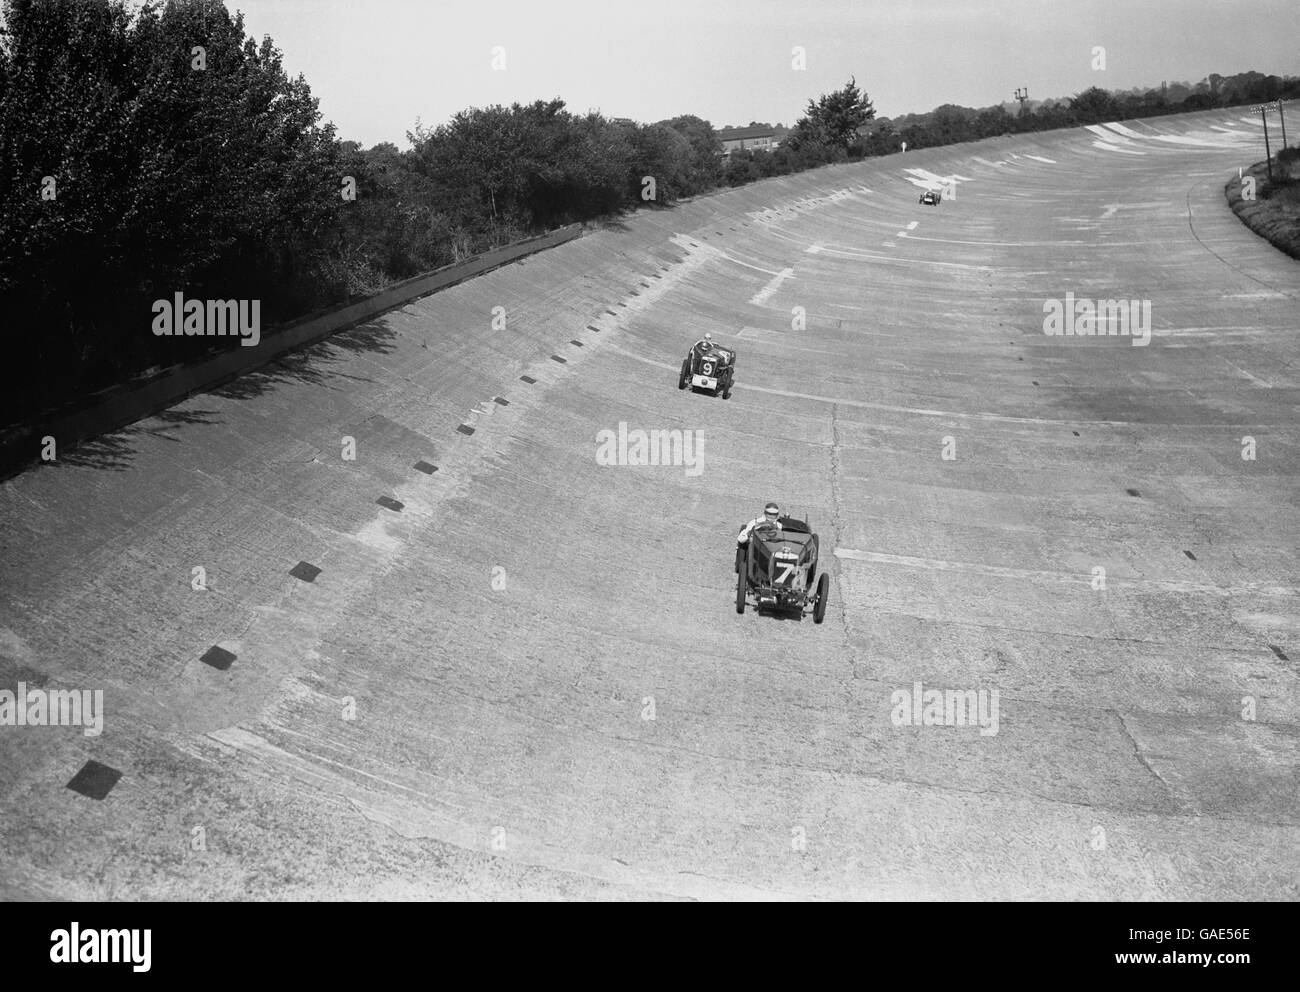 Motor Racing - 500 Mile Race - Brooklands. J.C. Elives and S.B. Hailwood in their MG's at speed on Brooklands banked circuit. Stock Photo